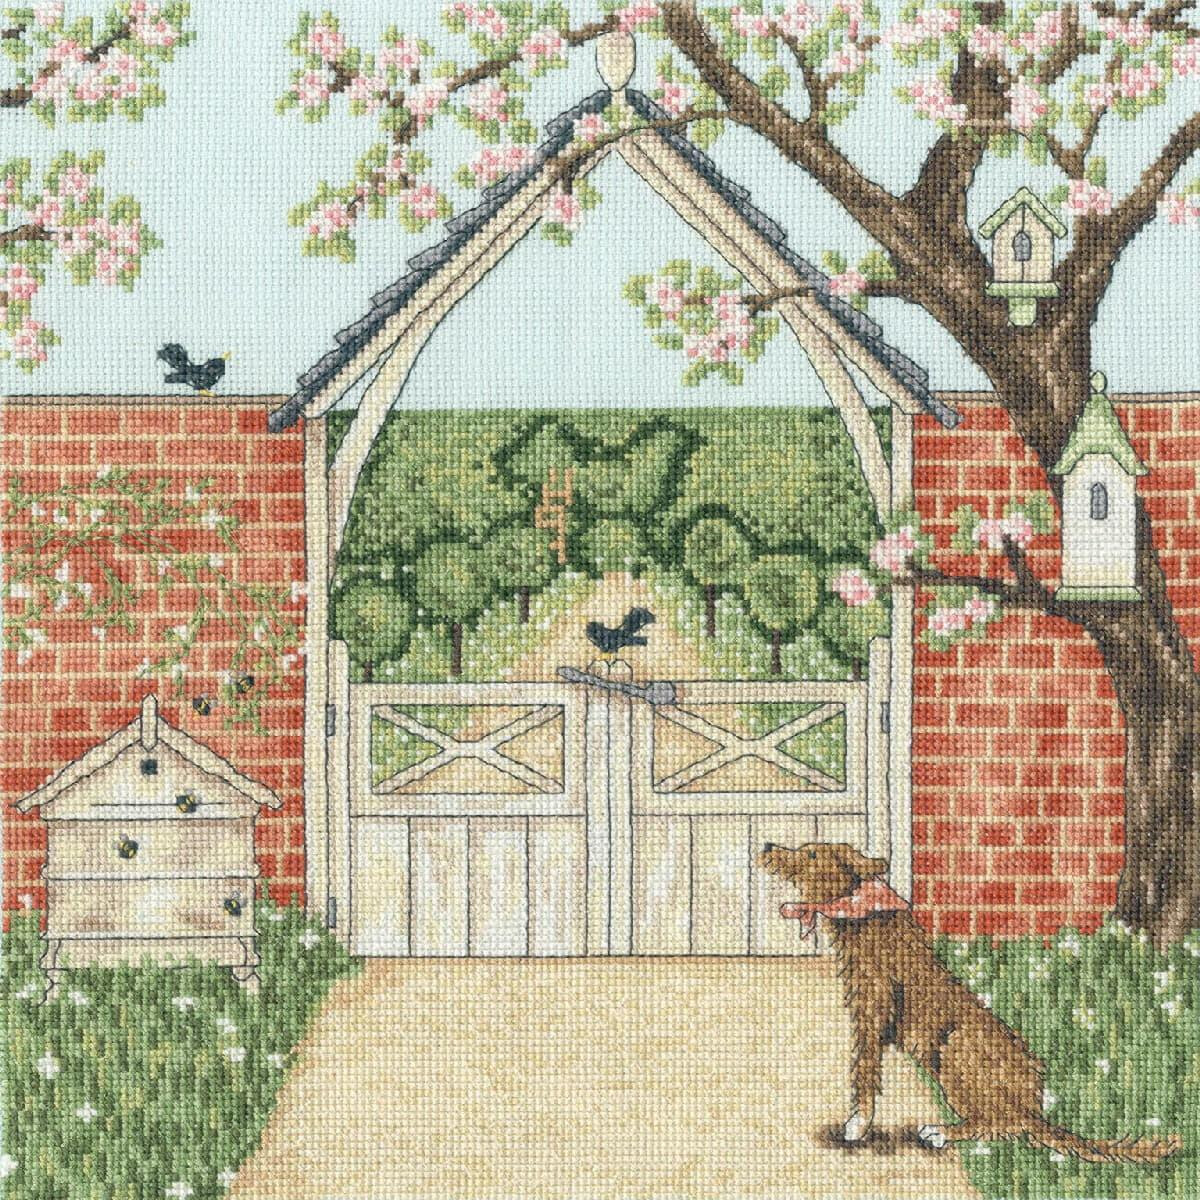 A detailed garden scene from Bothy Threads embroidery...